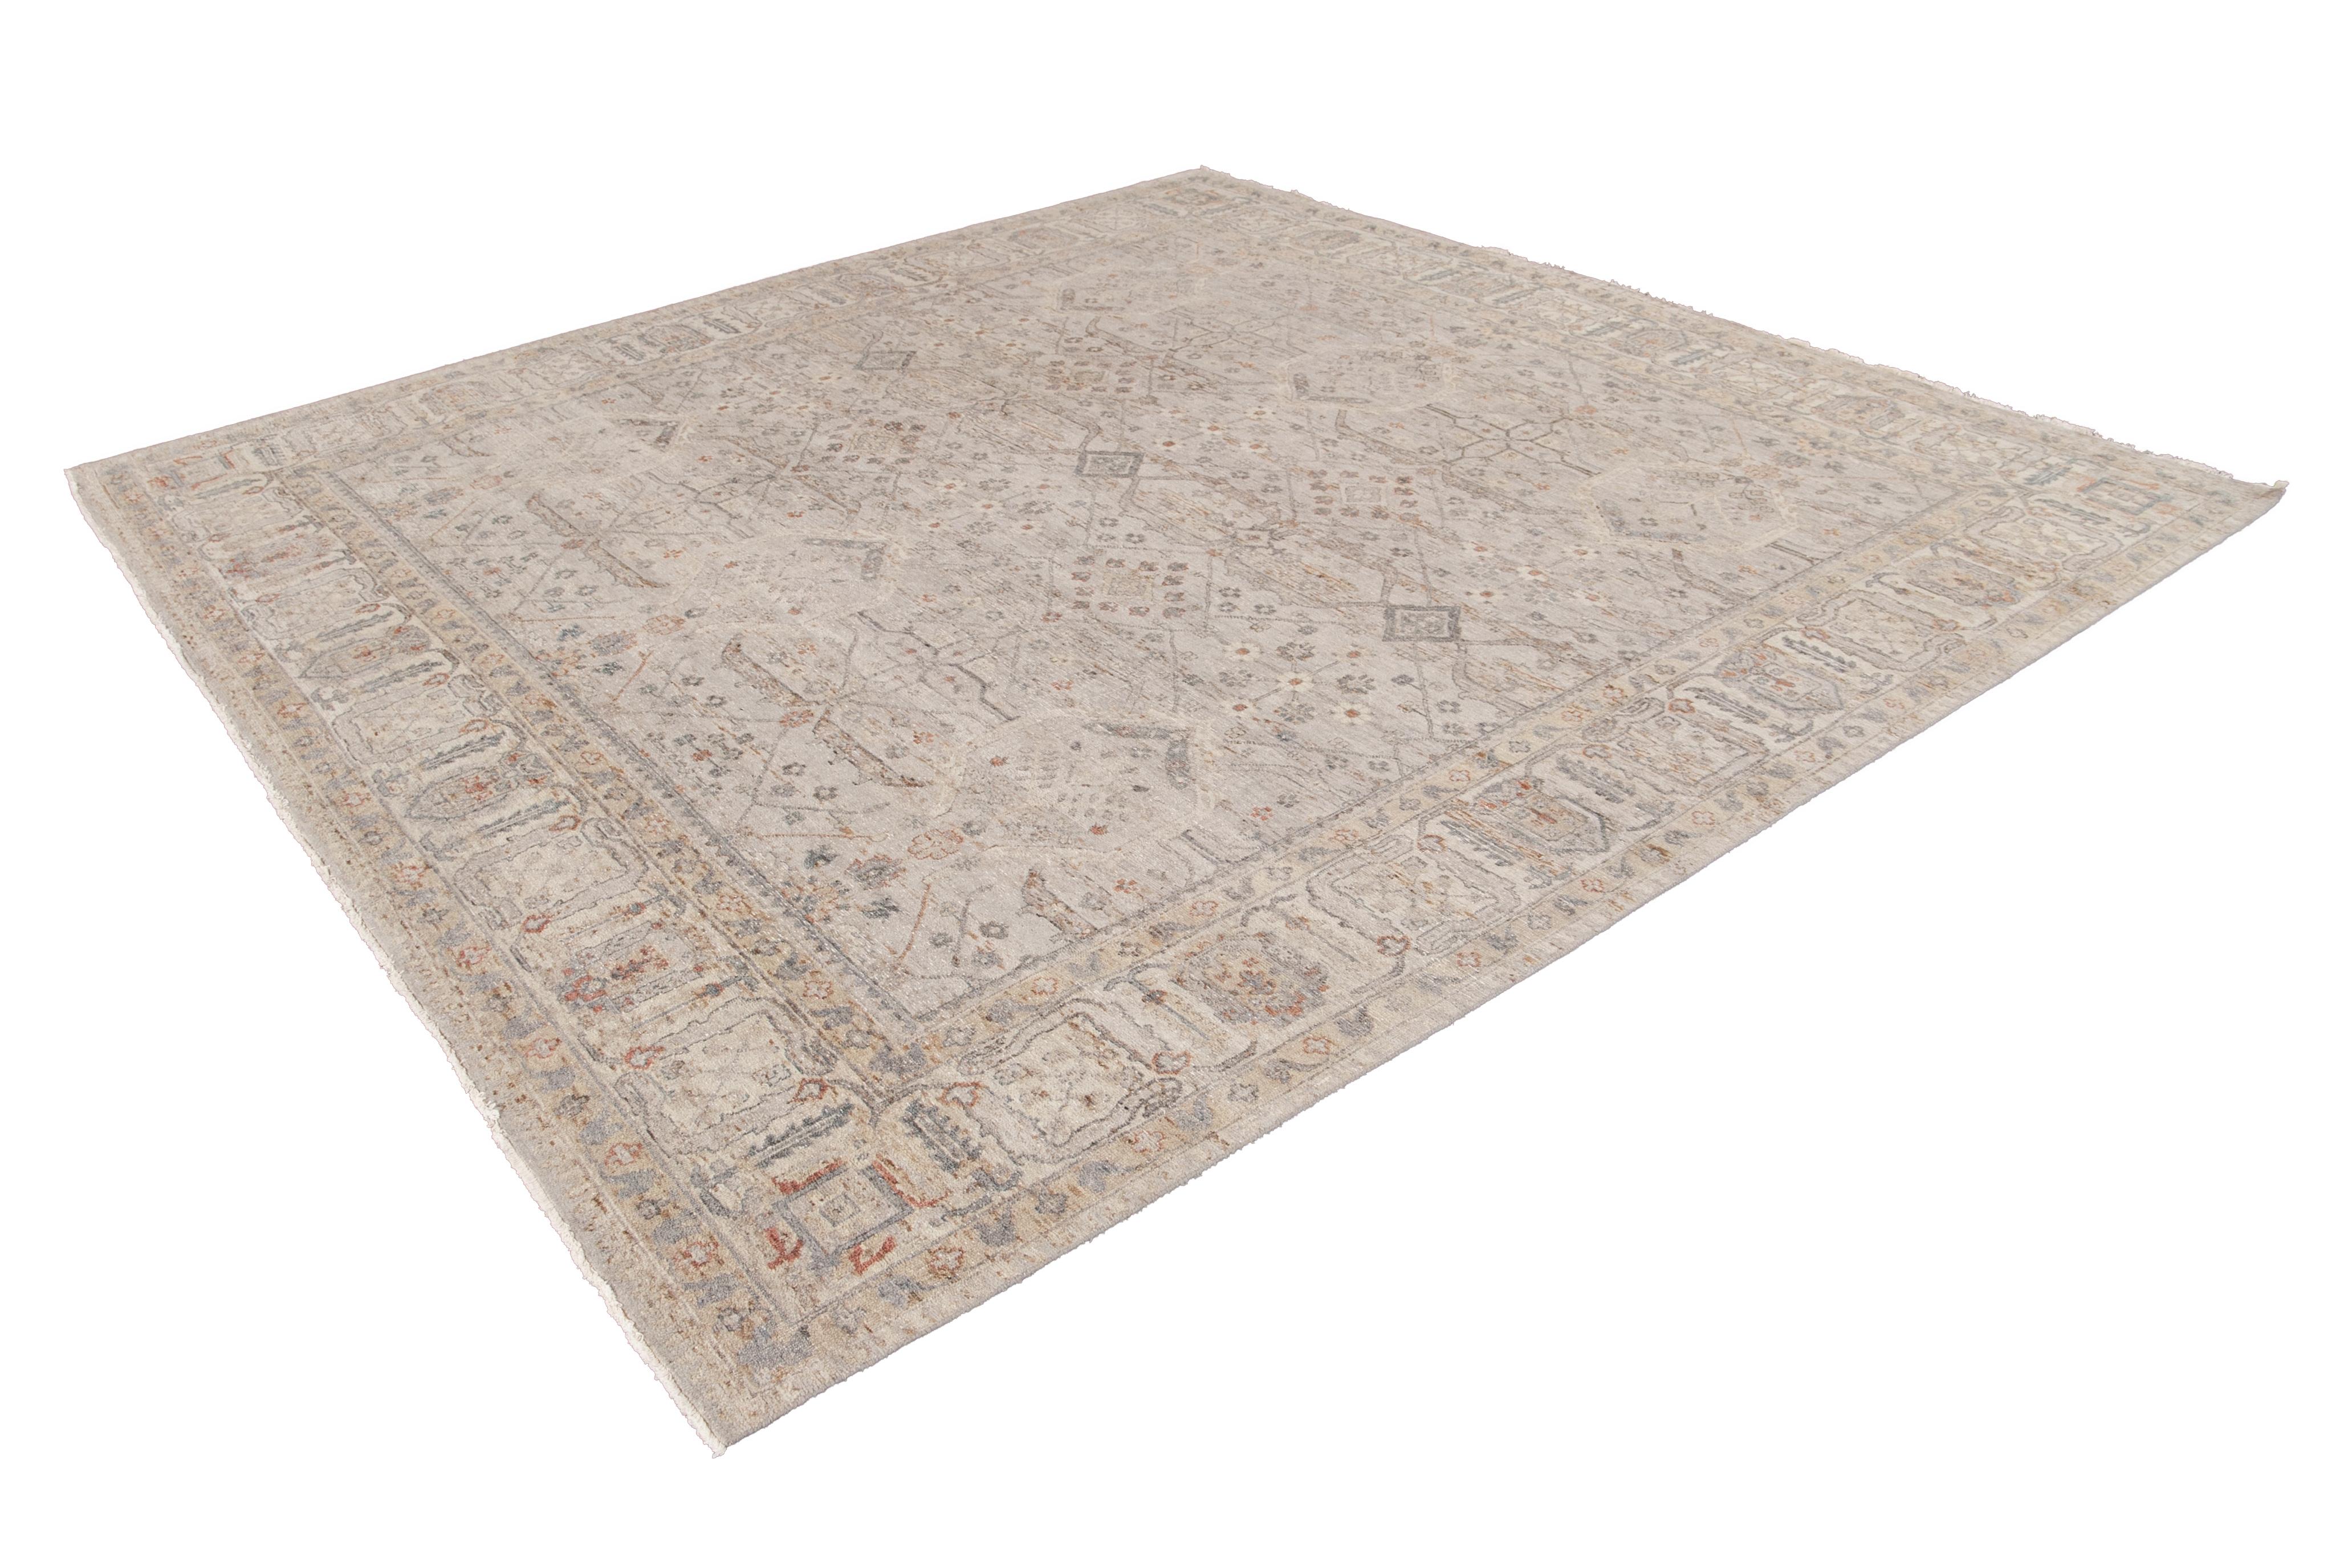 21st Century Contemporary Indian Square Wool Rug 10